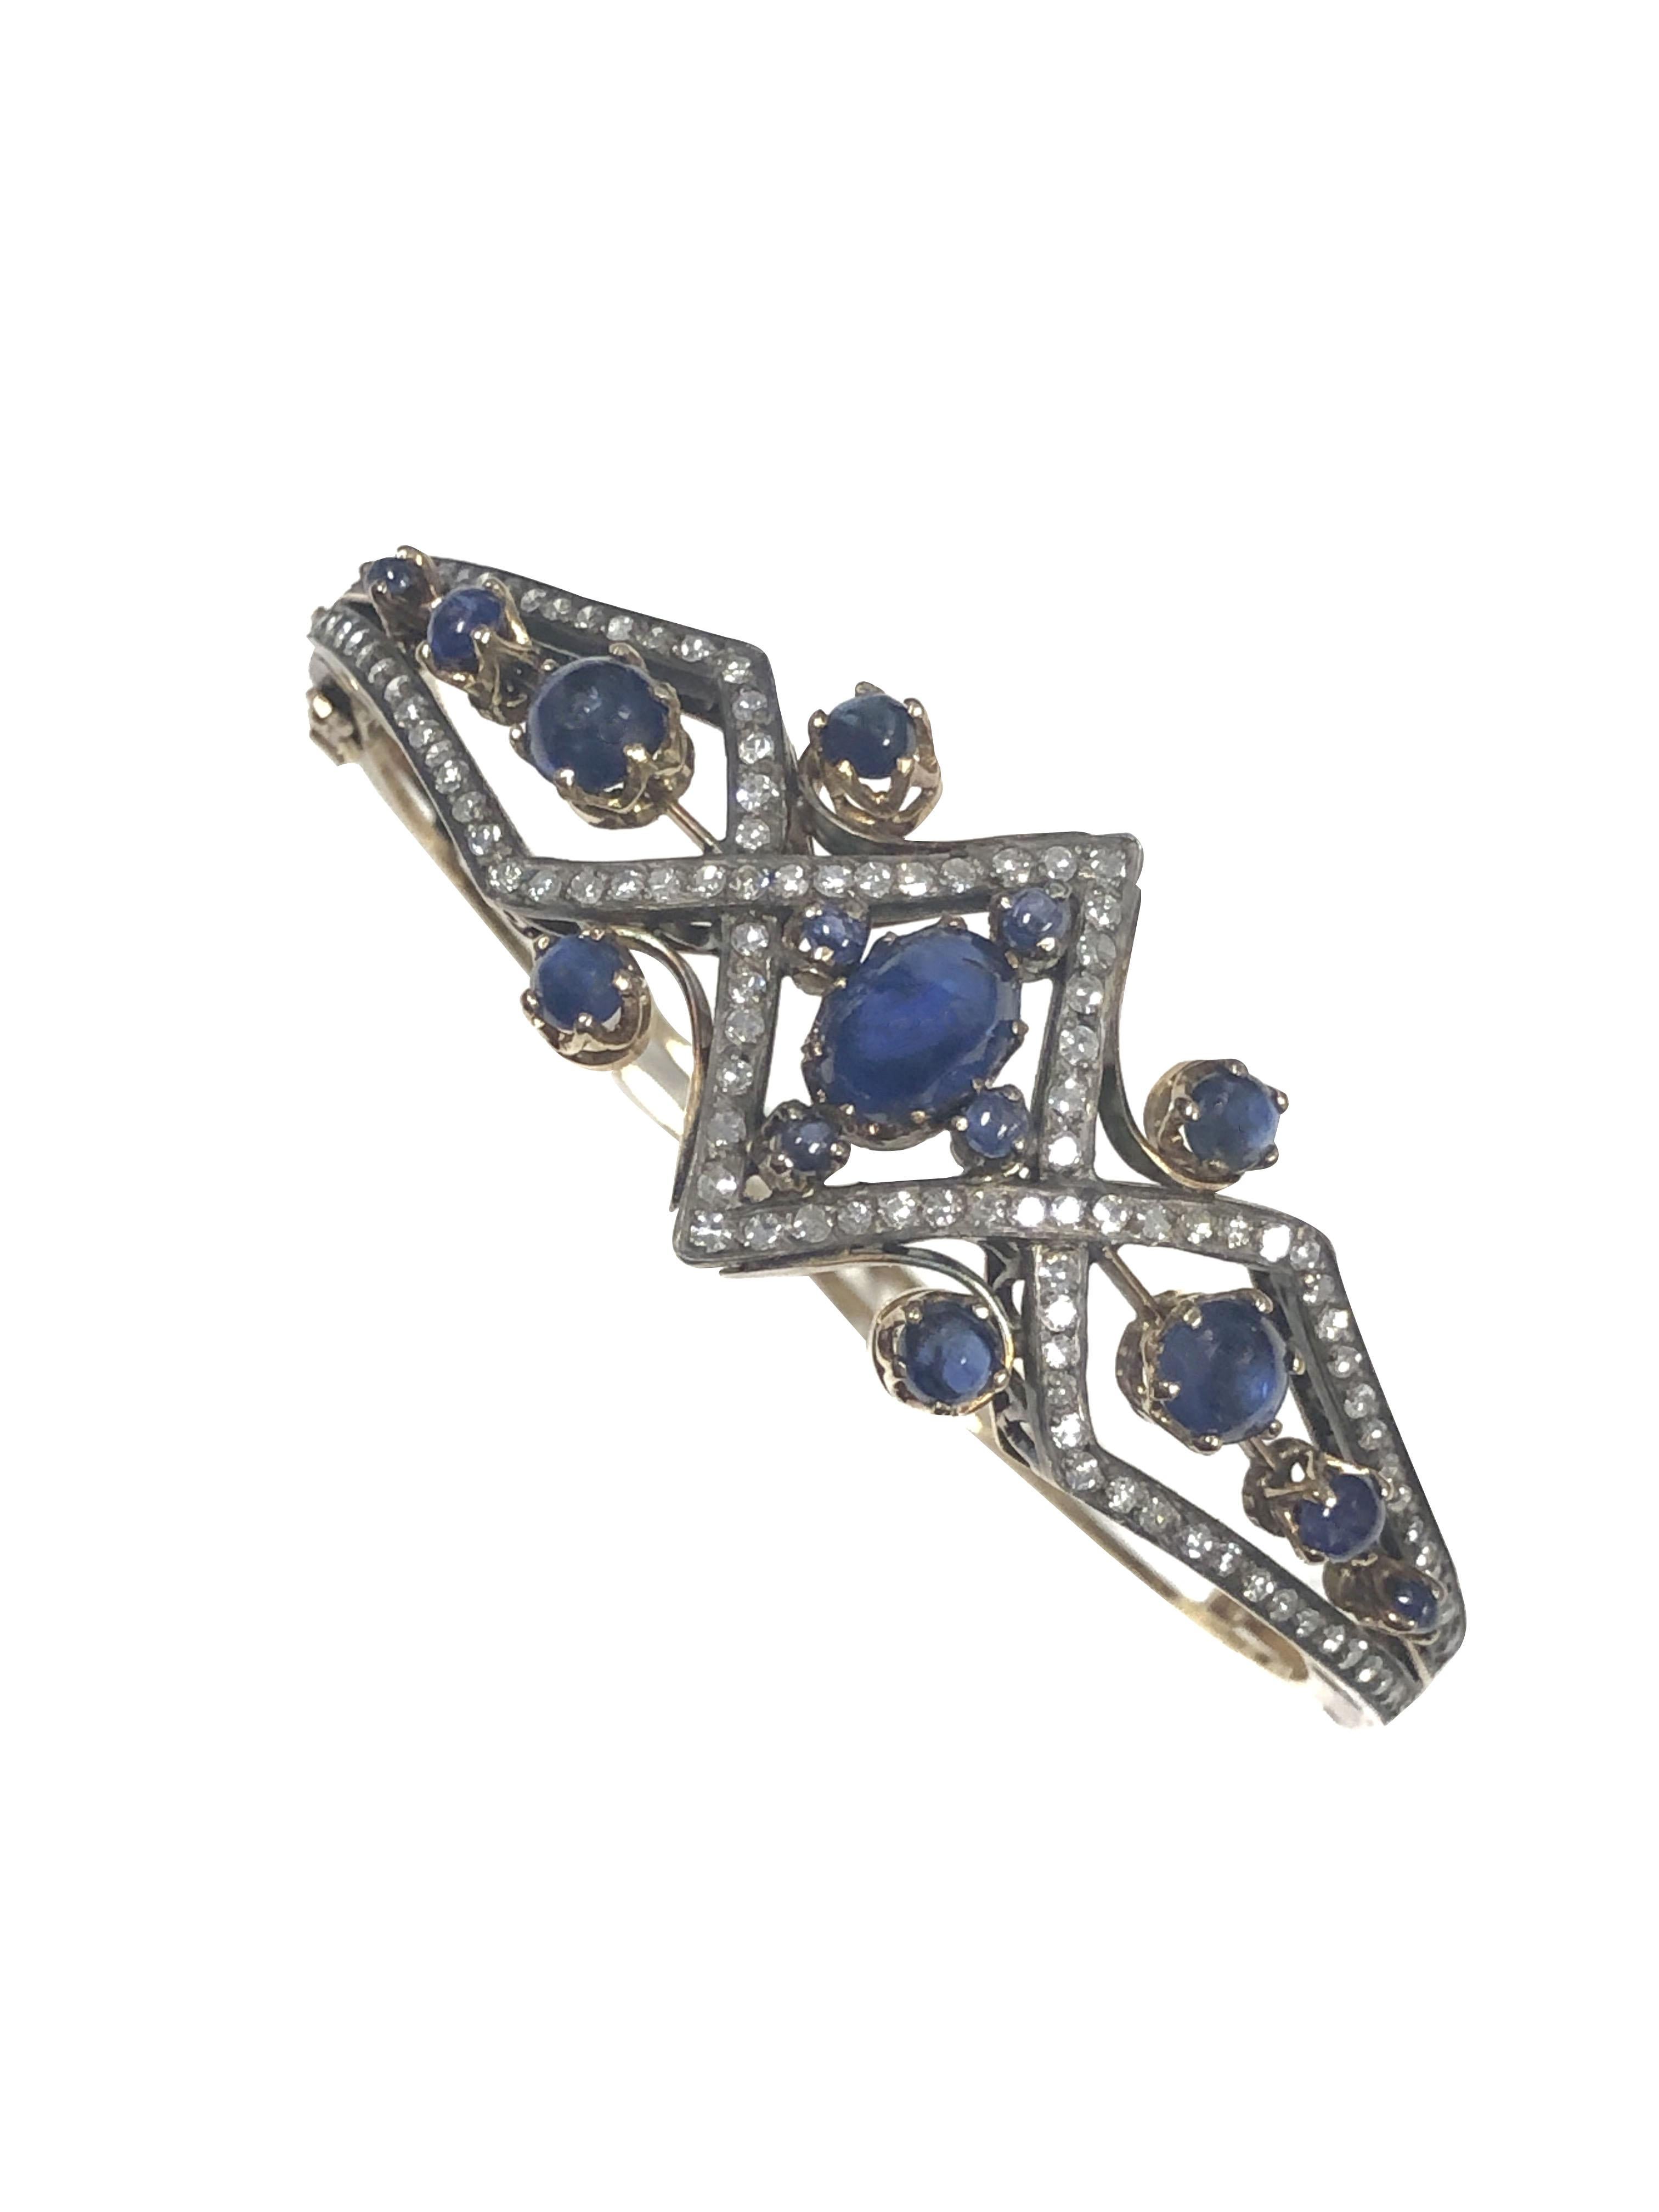 Circa 1910 Bangle Bracelet, 15K Yellow Gold with a Silver top, set with Old cut Diamonds totaling approximately 1.25 Carats and further set with very Fine color Cabochon Sapphires. Measuring just under 1 inch wide at the very center of the top and